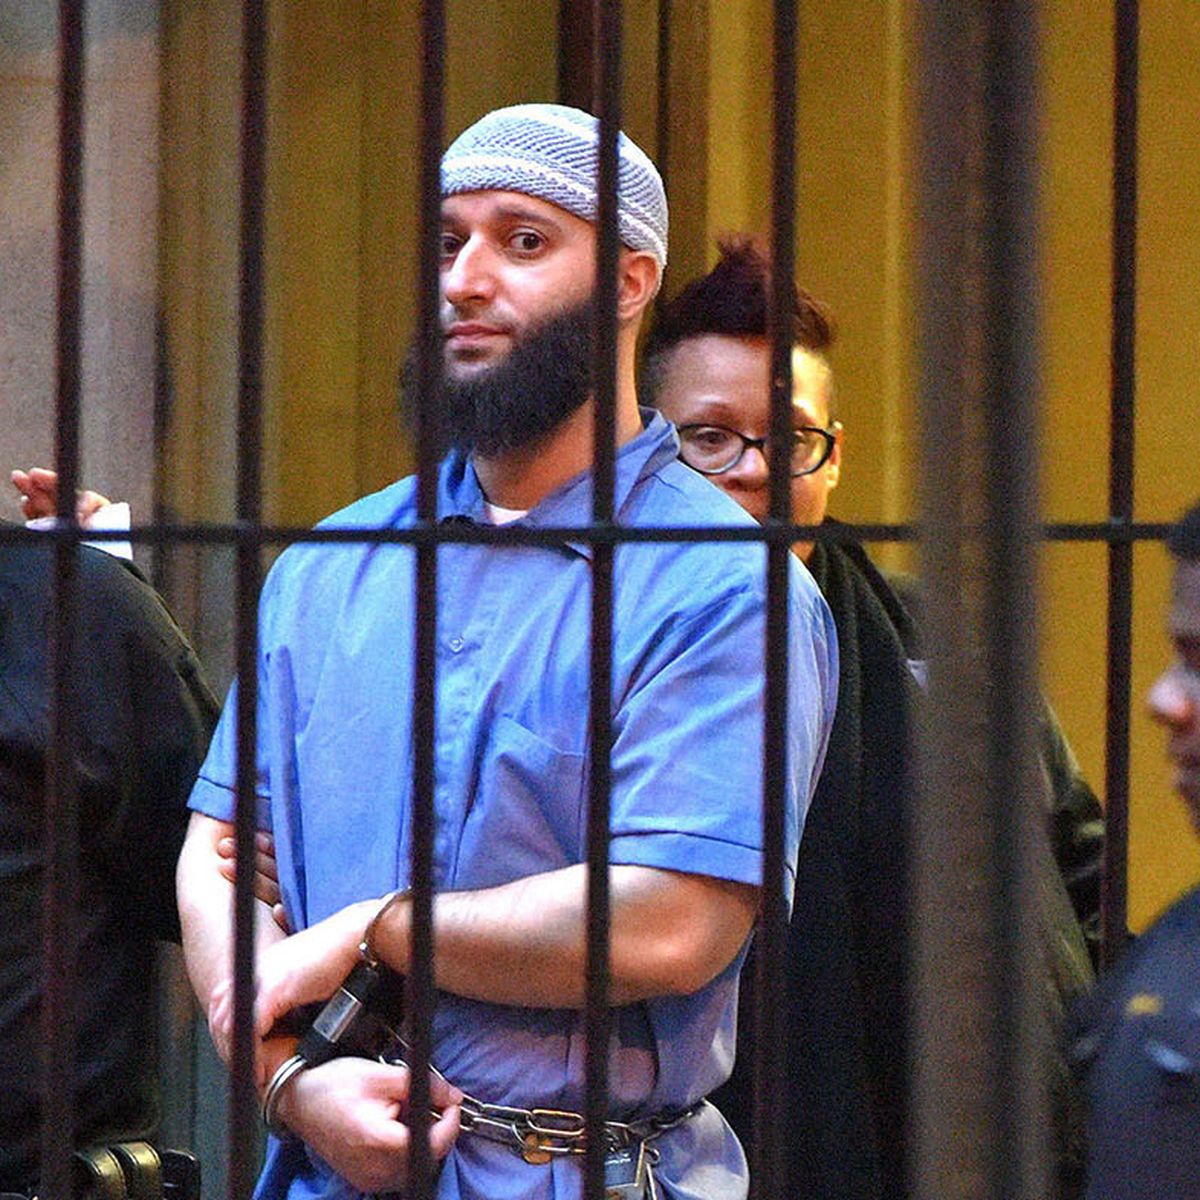 Adnan Syed Serial podcast case: Prosecutors drop charges over Hae Min Lee  killing